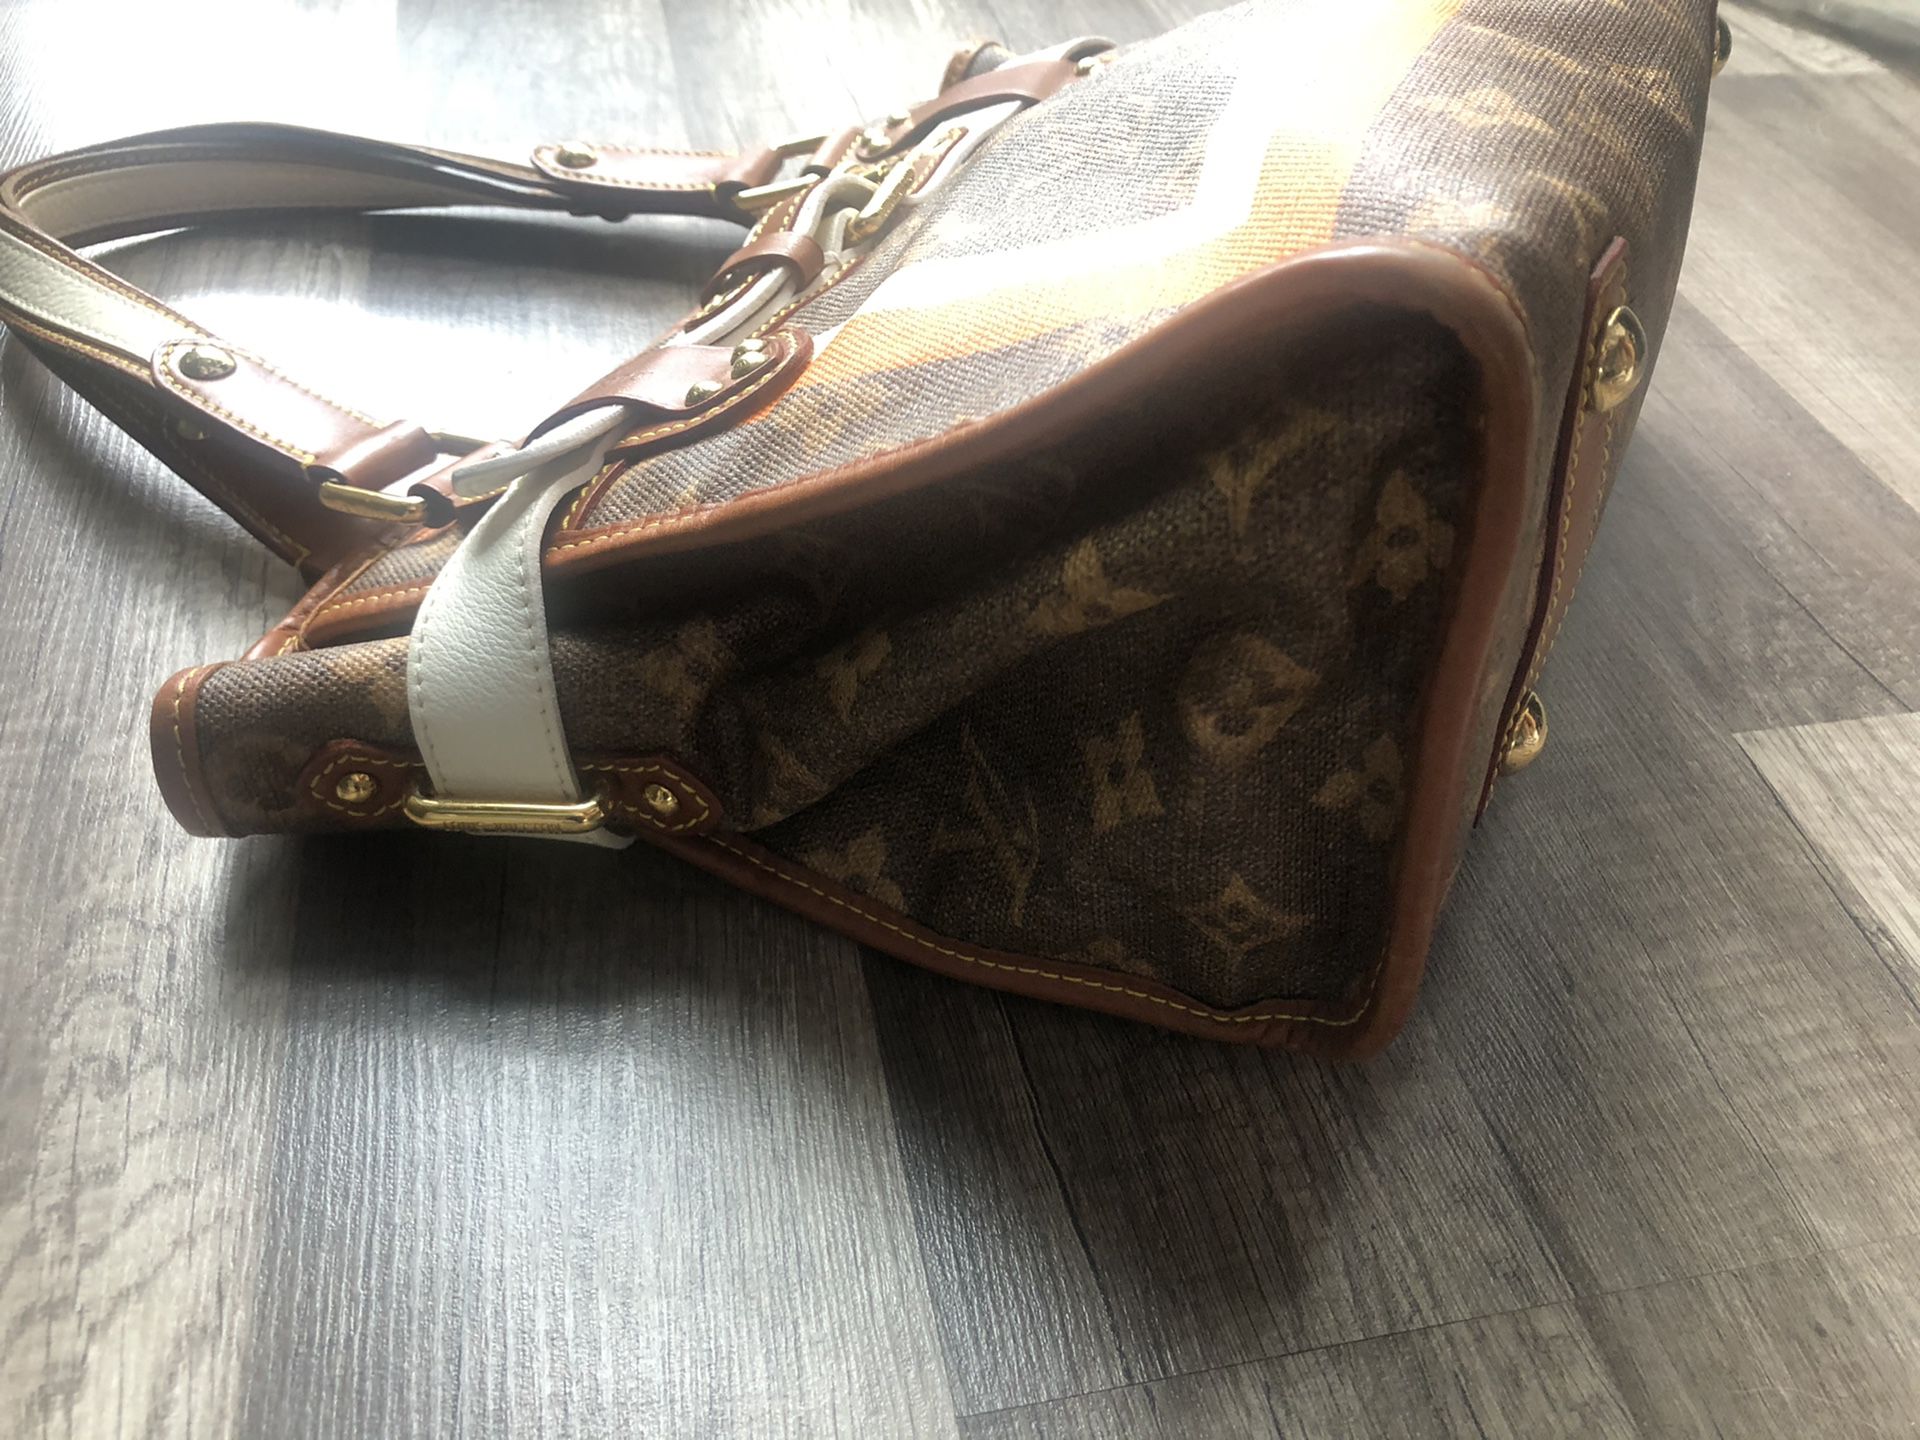 Louis Vuitton Papillon 19 From 2004 for Sale in Yorba Linda, CA - OfferUp